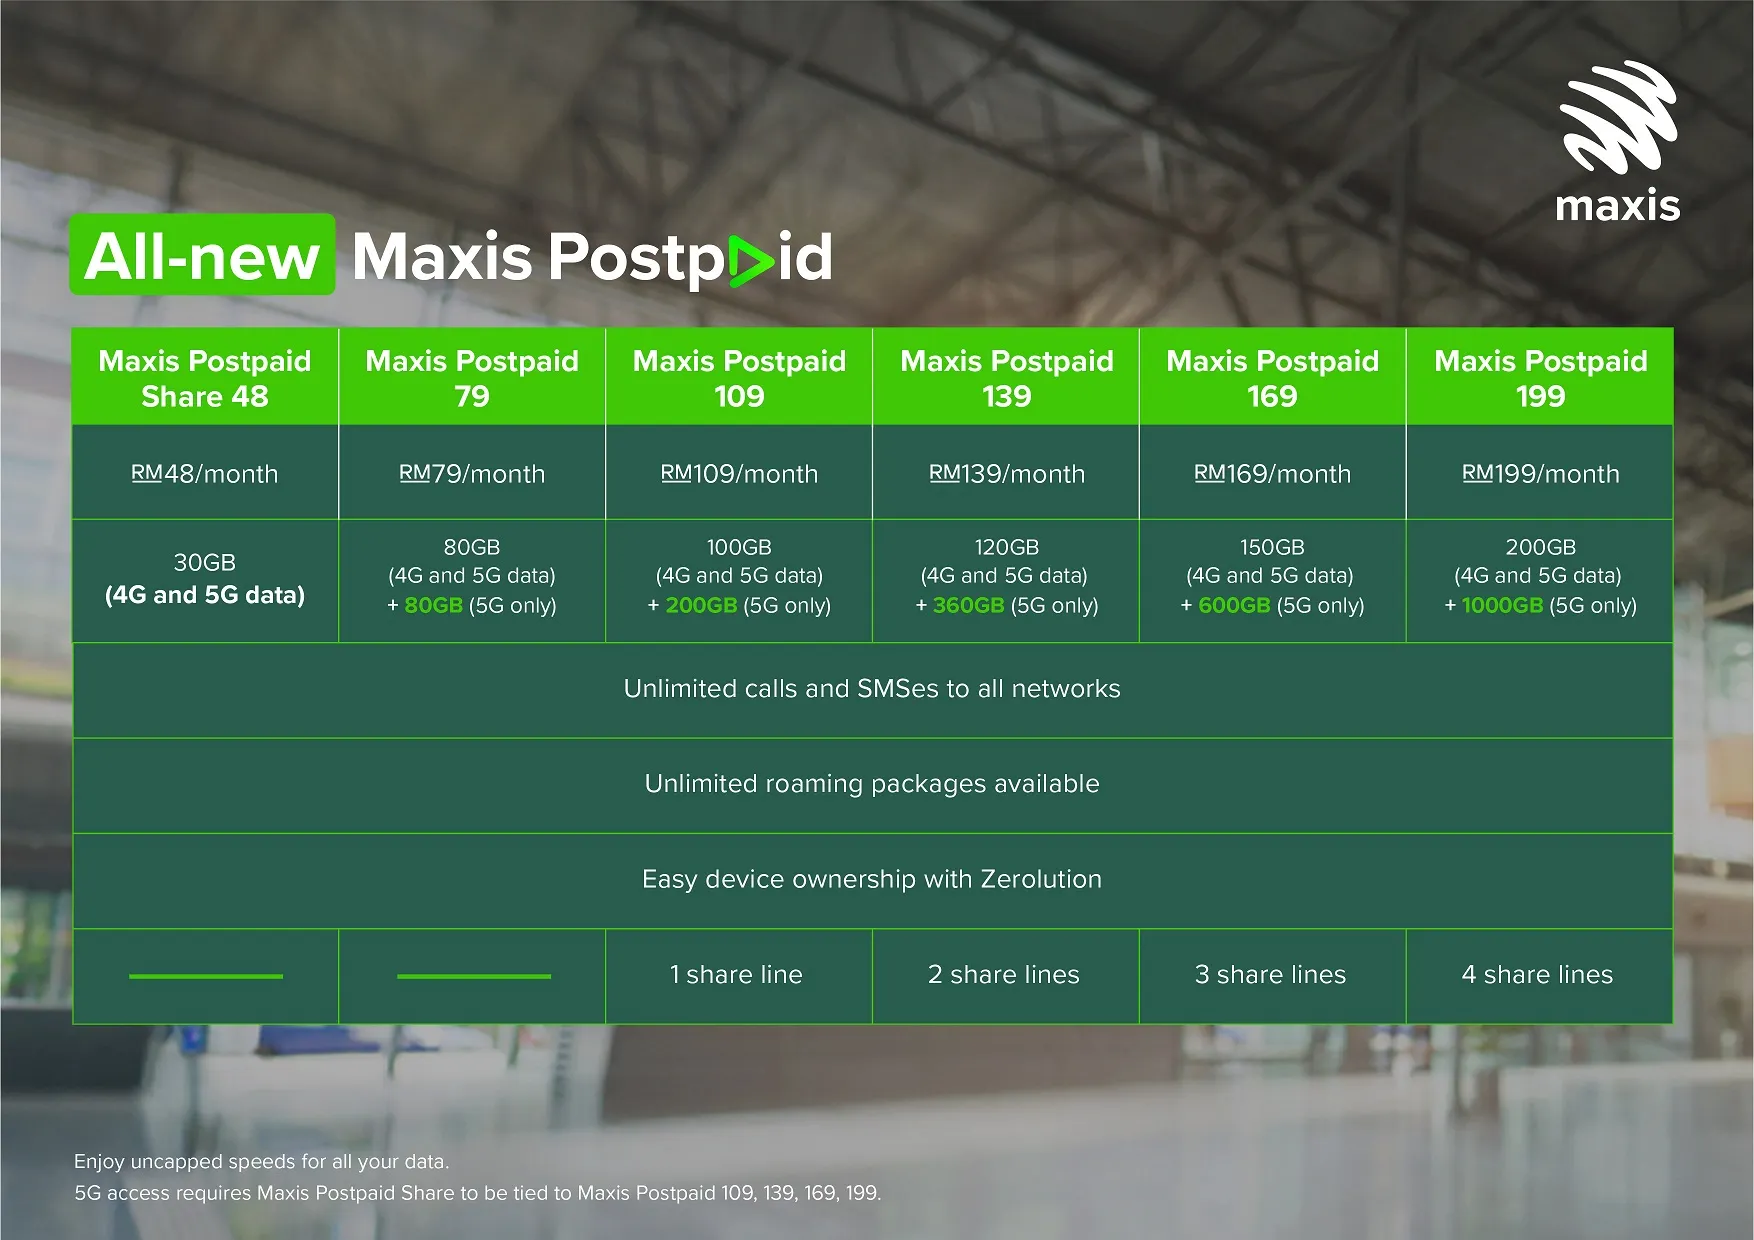 Maxis Postpaid plans offer truly 5G experience with uncapped speed and up to 1,000GB in bonus 5G data